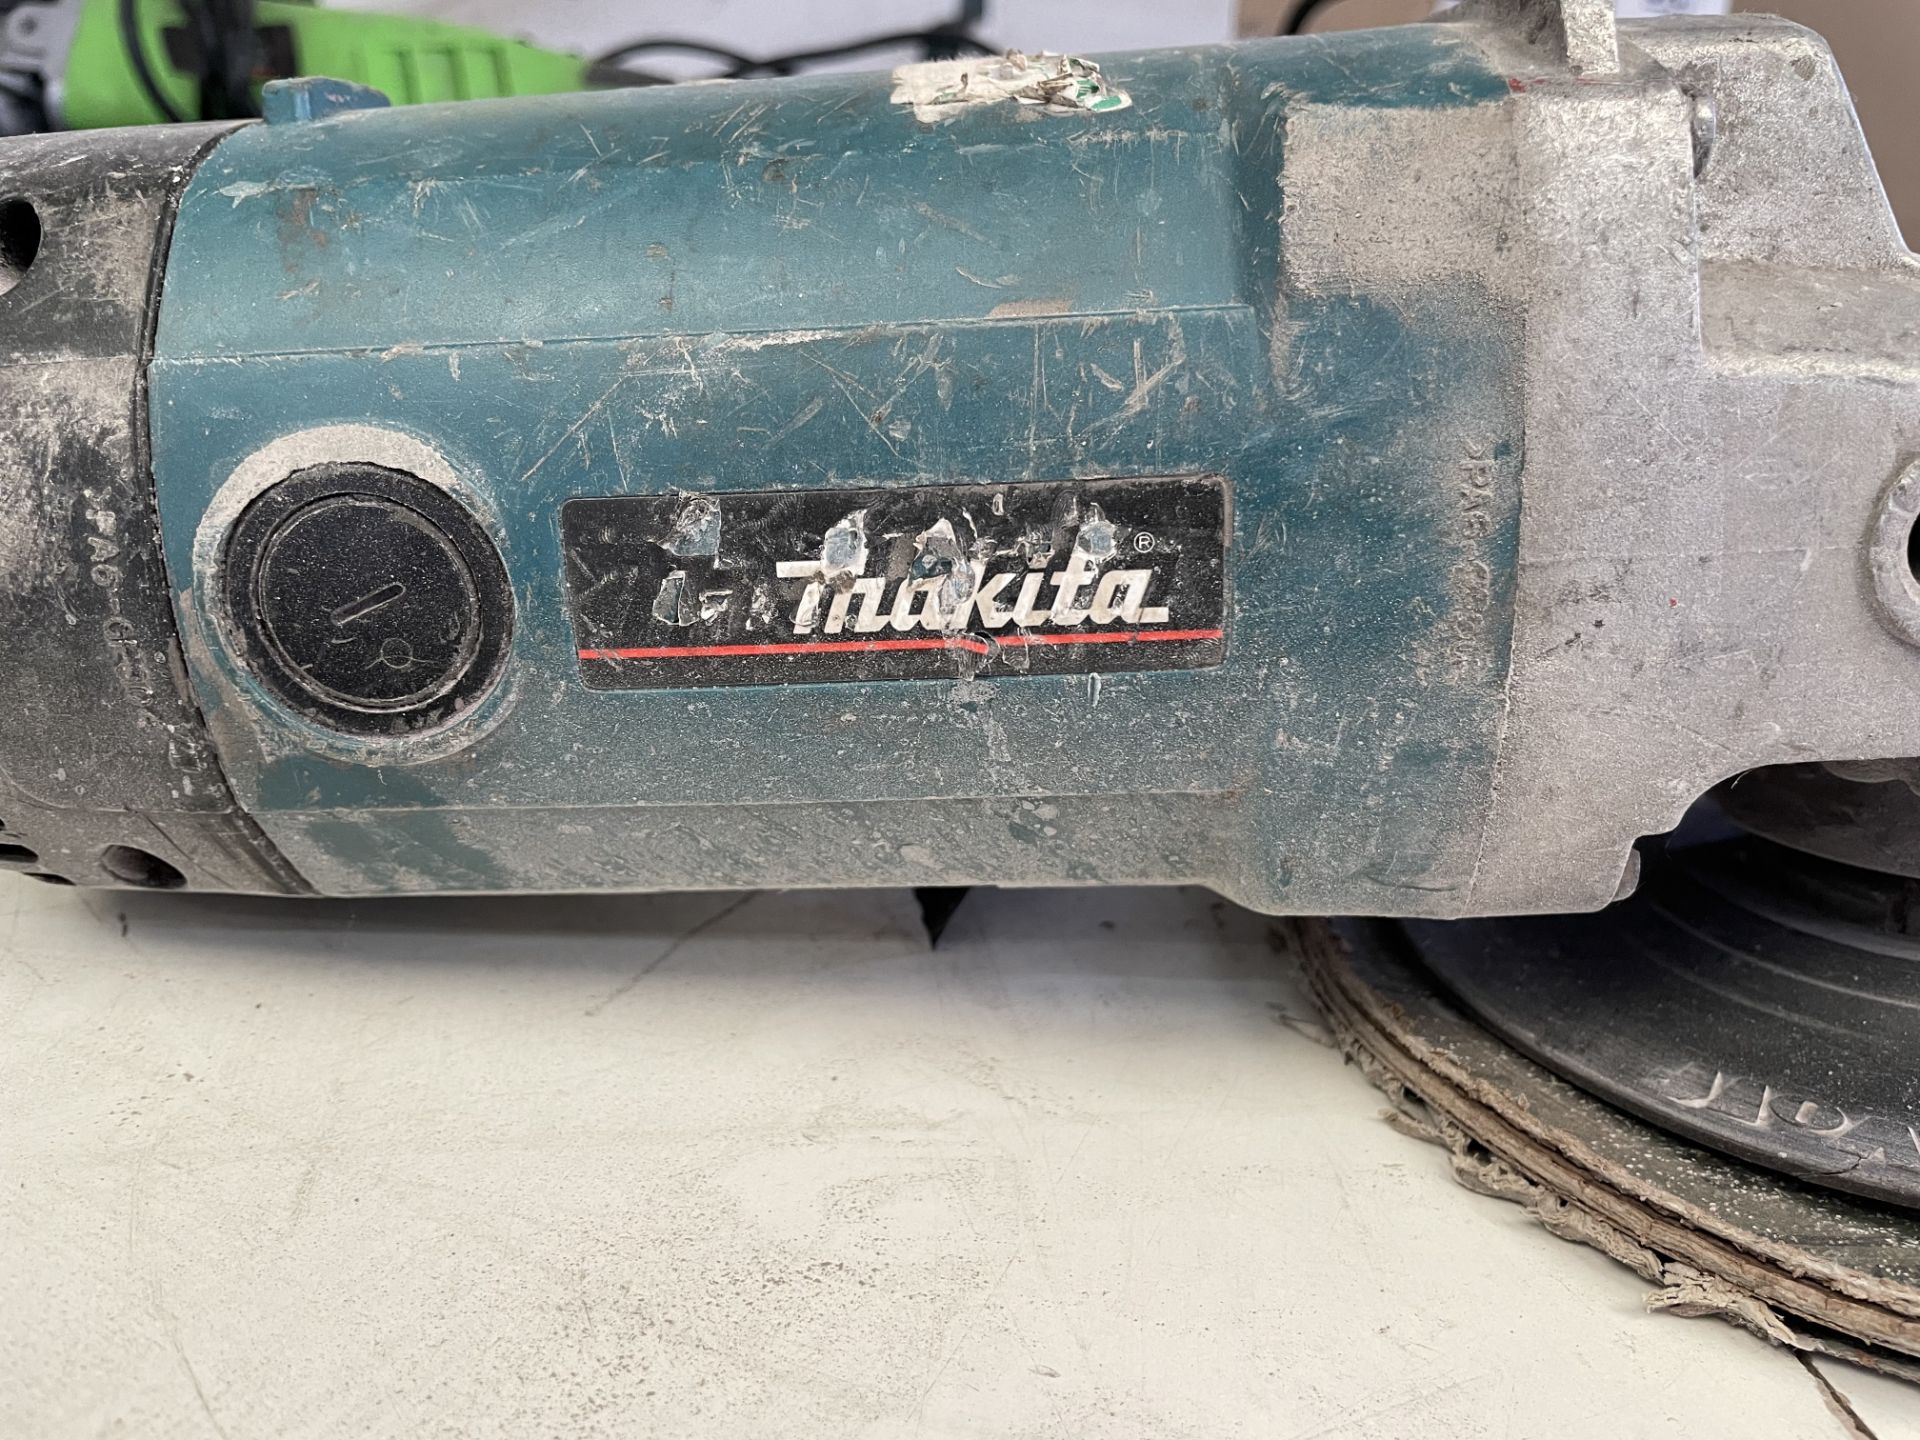 Makita 9069 Polisher, 240v (Location: Bedford. Please Refer to General Notes) - Image 2 of 4